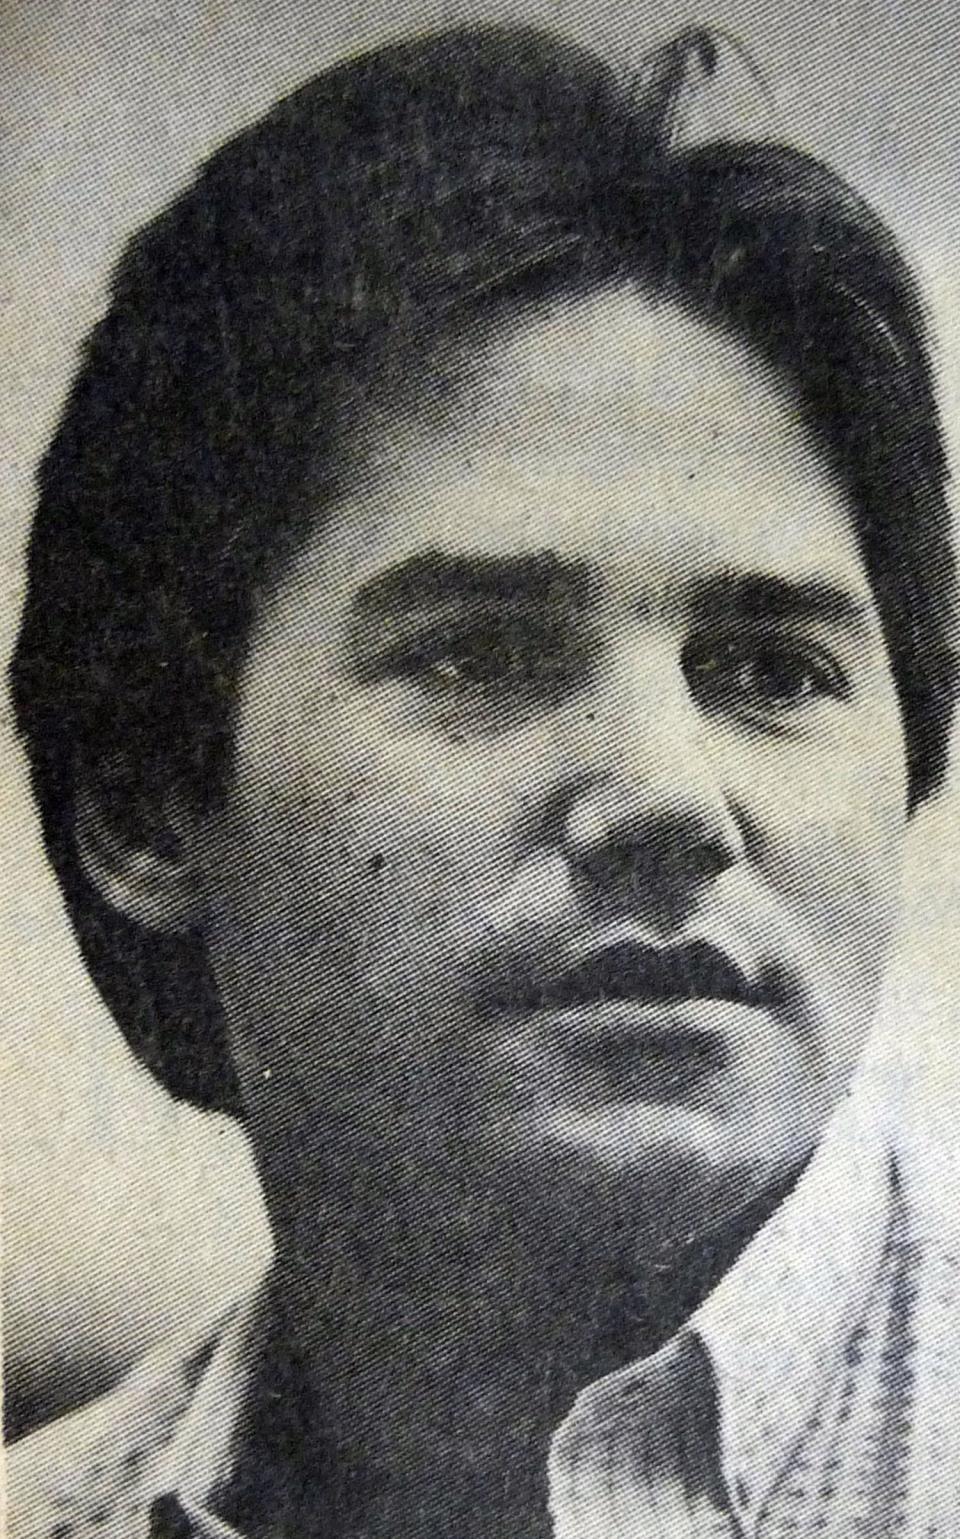 A photo of John Paul Nichols that appeared in The Indio Daily News in 1985.